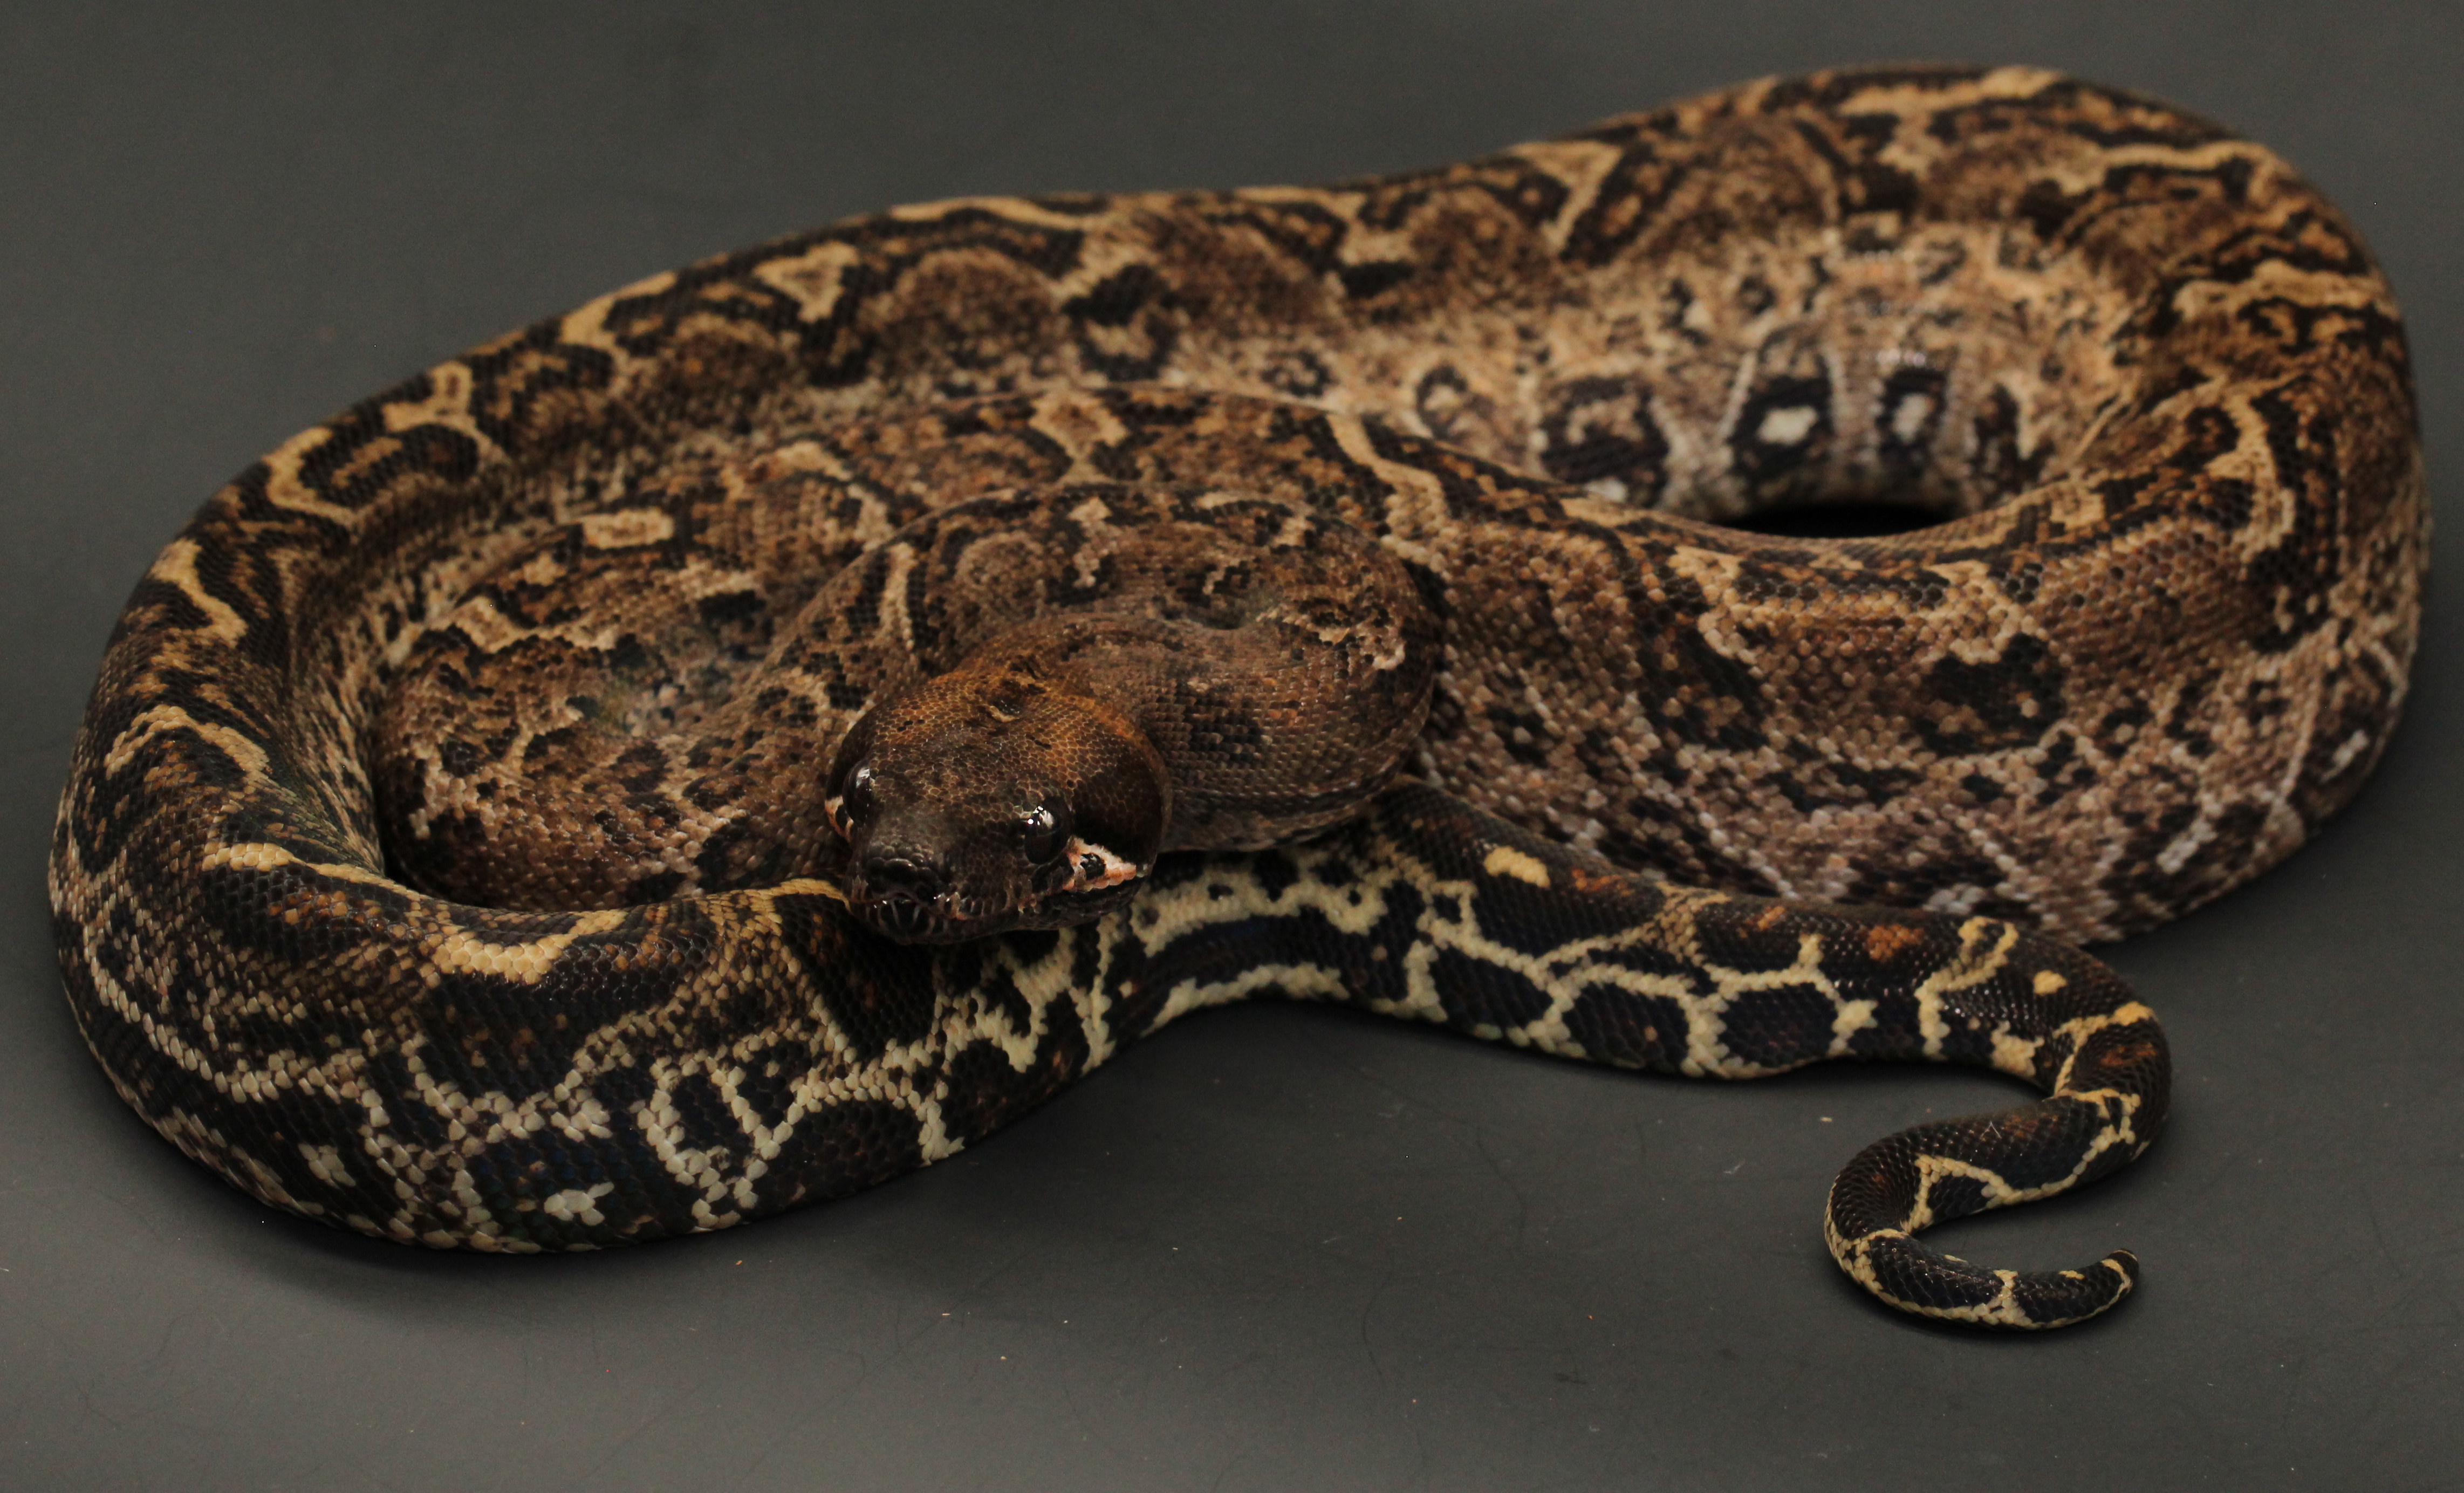 Leopard Boa Constrictor by Pet Paradise